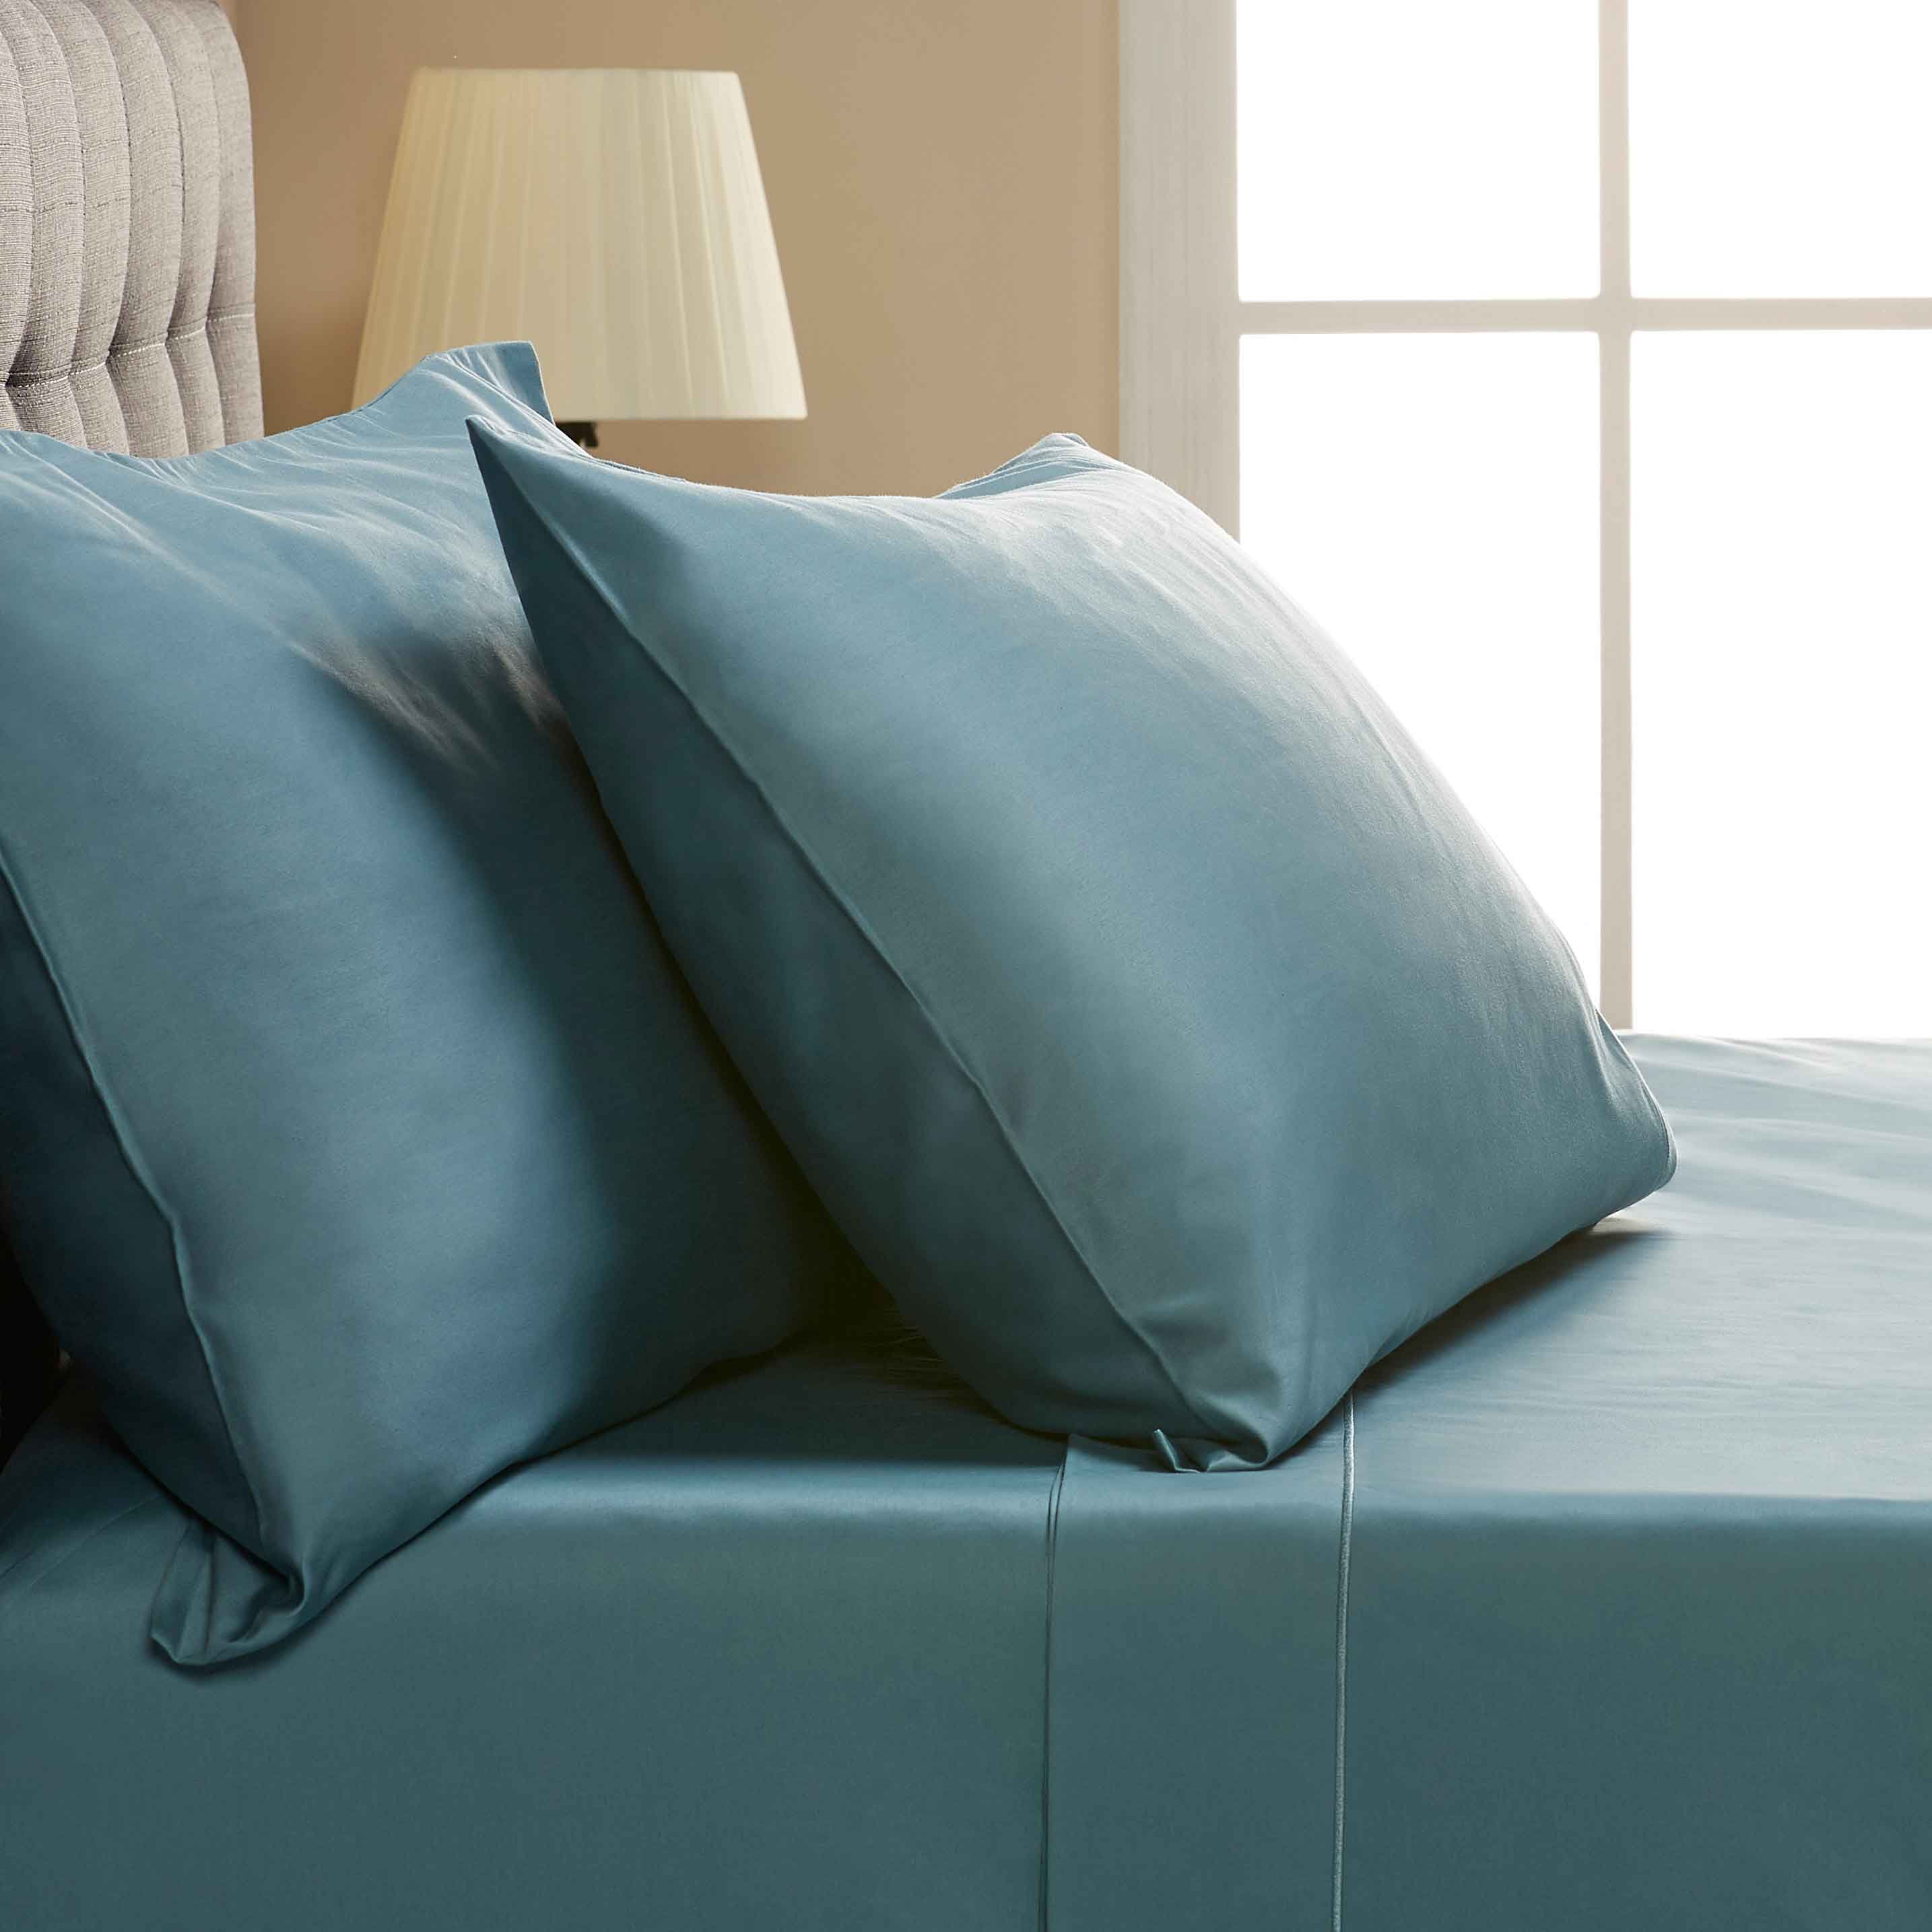 Turquoise Striped Bedding Collection 1000 Thread Count Egyptian Cotton US Sizes 